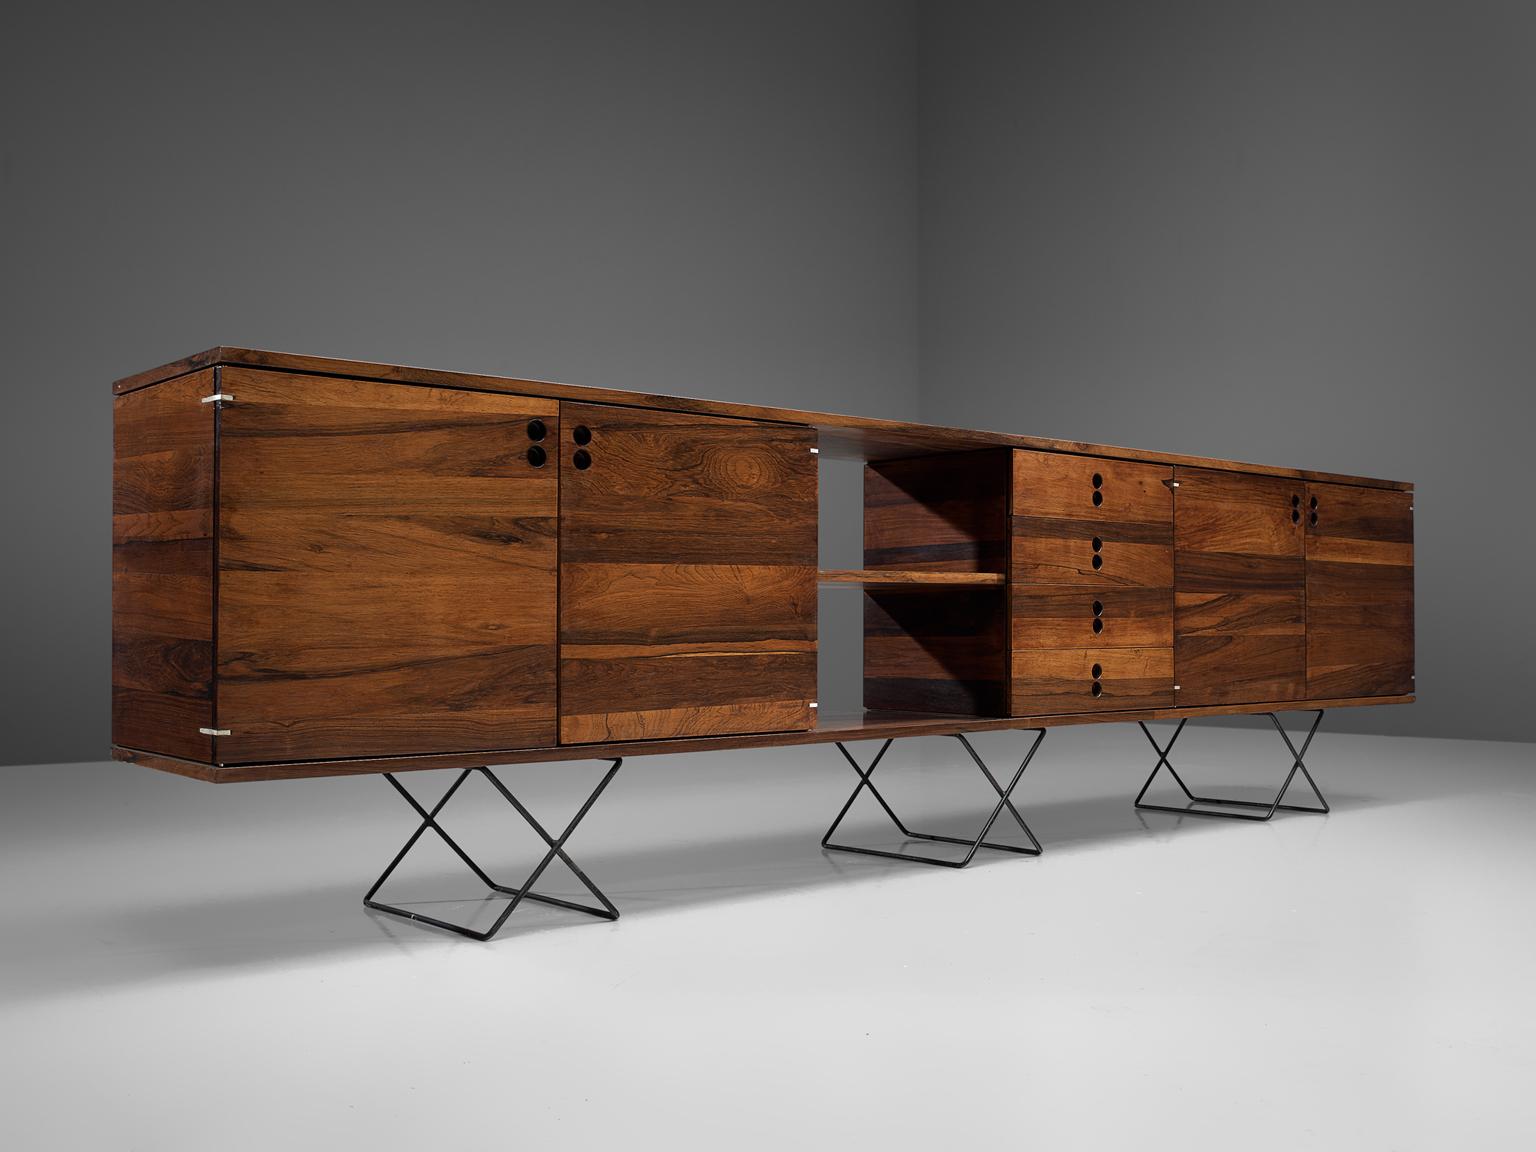 Jorge Zalszupin for L'Atelier, sideboard, rosewood and metal, Brazil, 1960s

This nearly 3m/980ft long sideboard is part of Jorge Zalszupin's line of modular furniture. This line offers a variety of typologies and combination of modules to meet